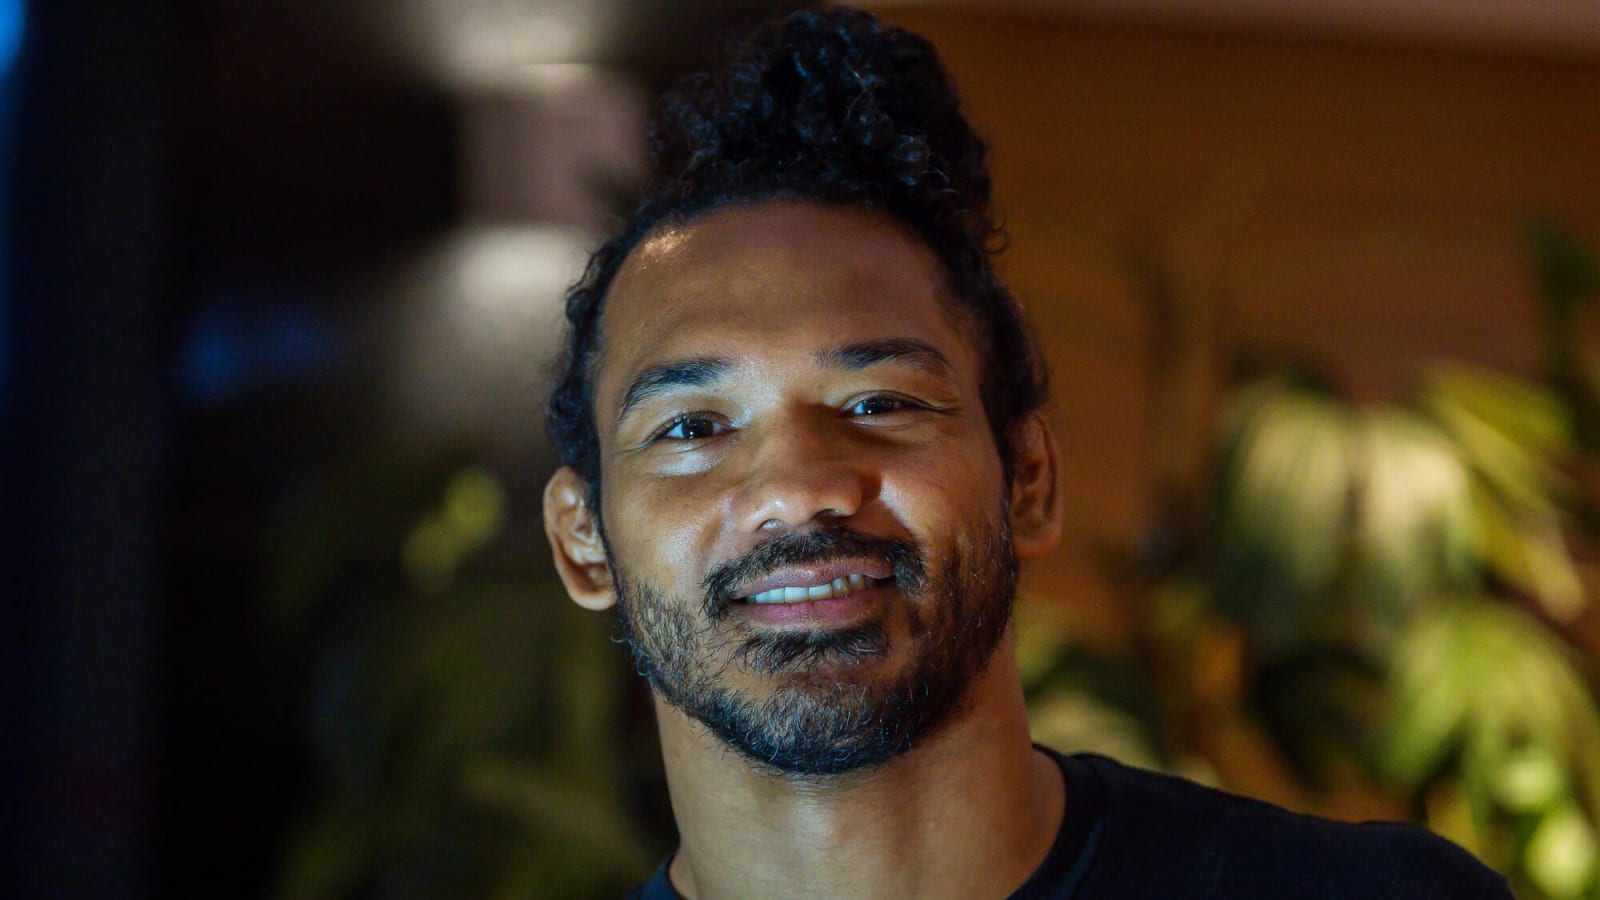 By The Numbers: Benson Henderson vs. Peter Queally